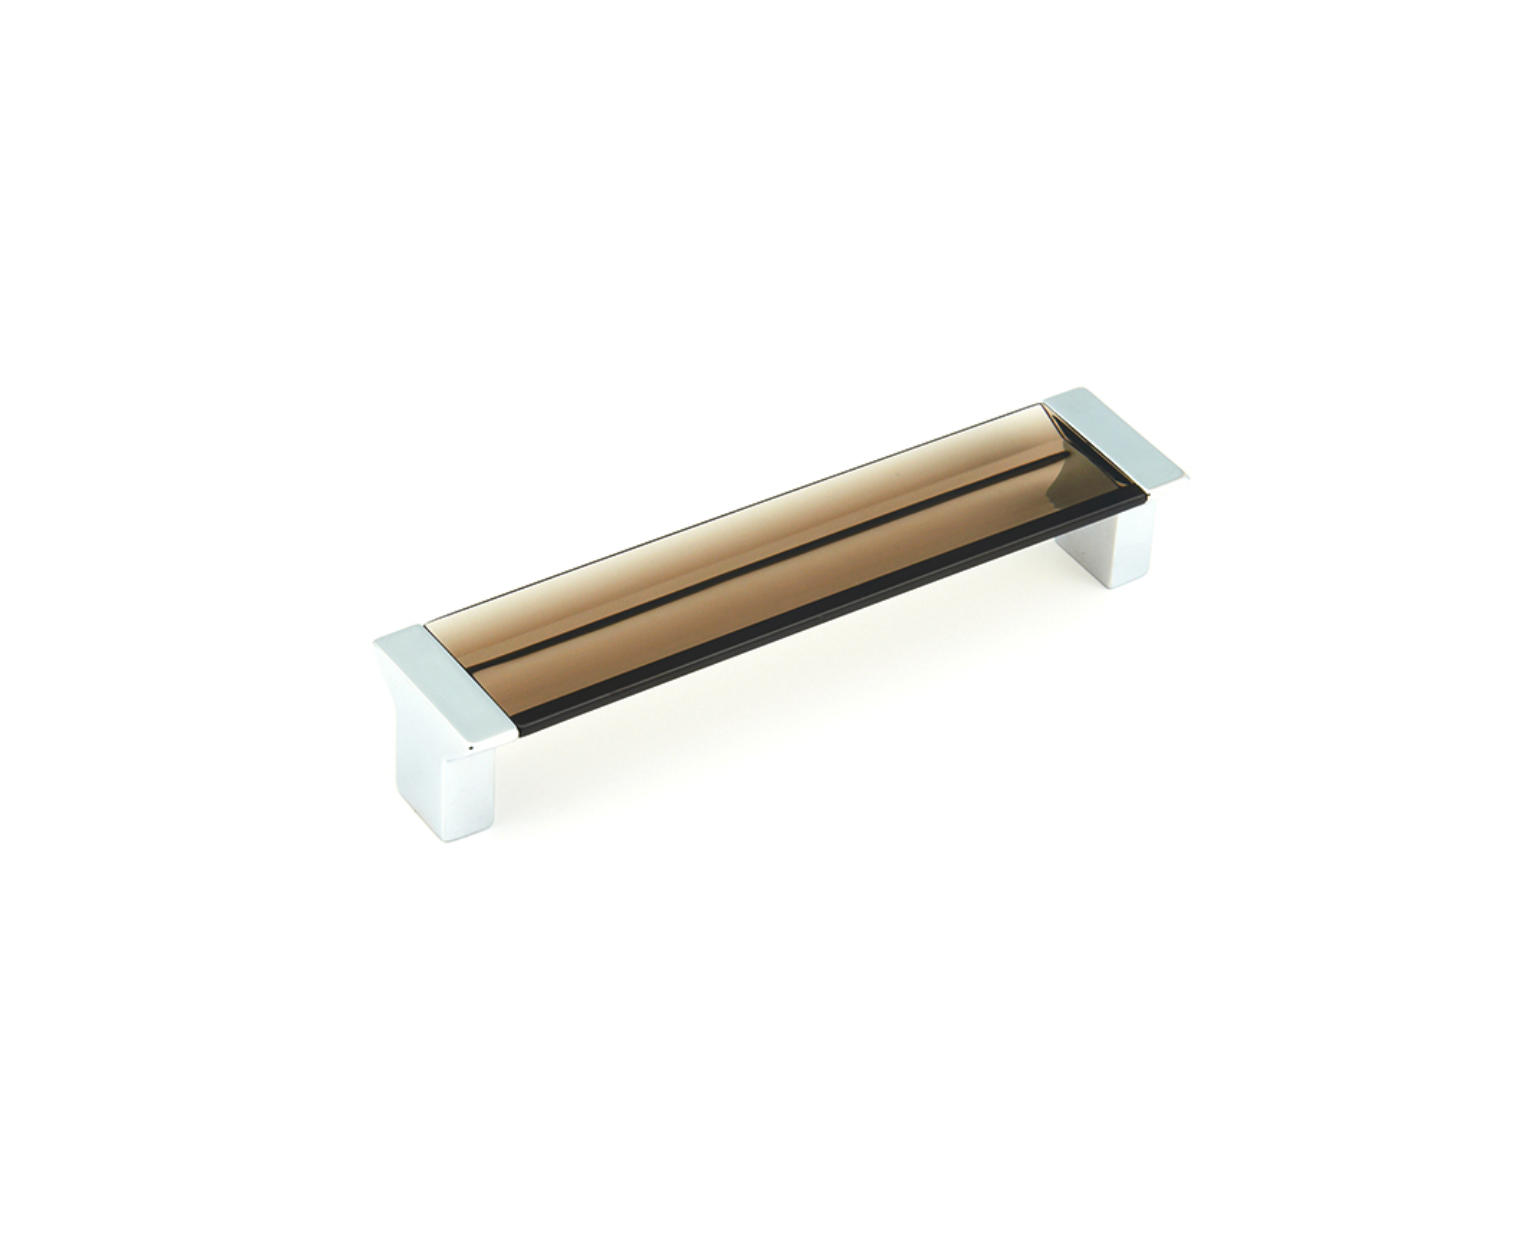 Polished Chrome "Ponce" Smoked Glass Cabinet Knob and Drawer Pulls - Industry Hardware